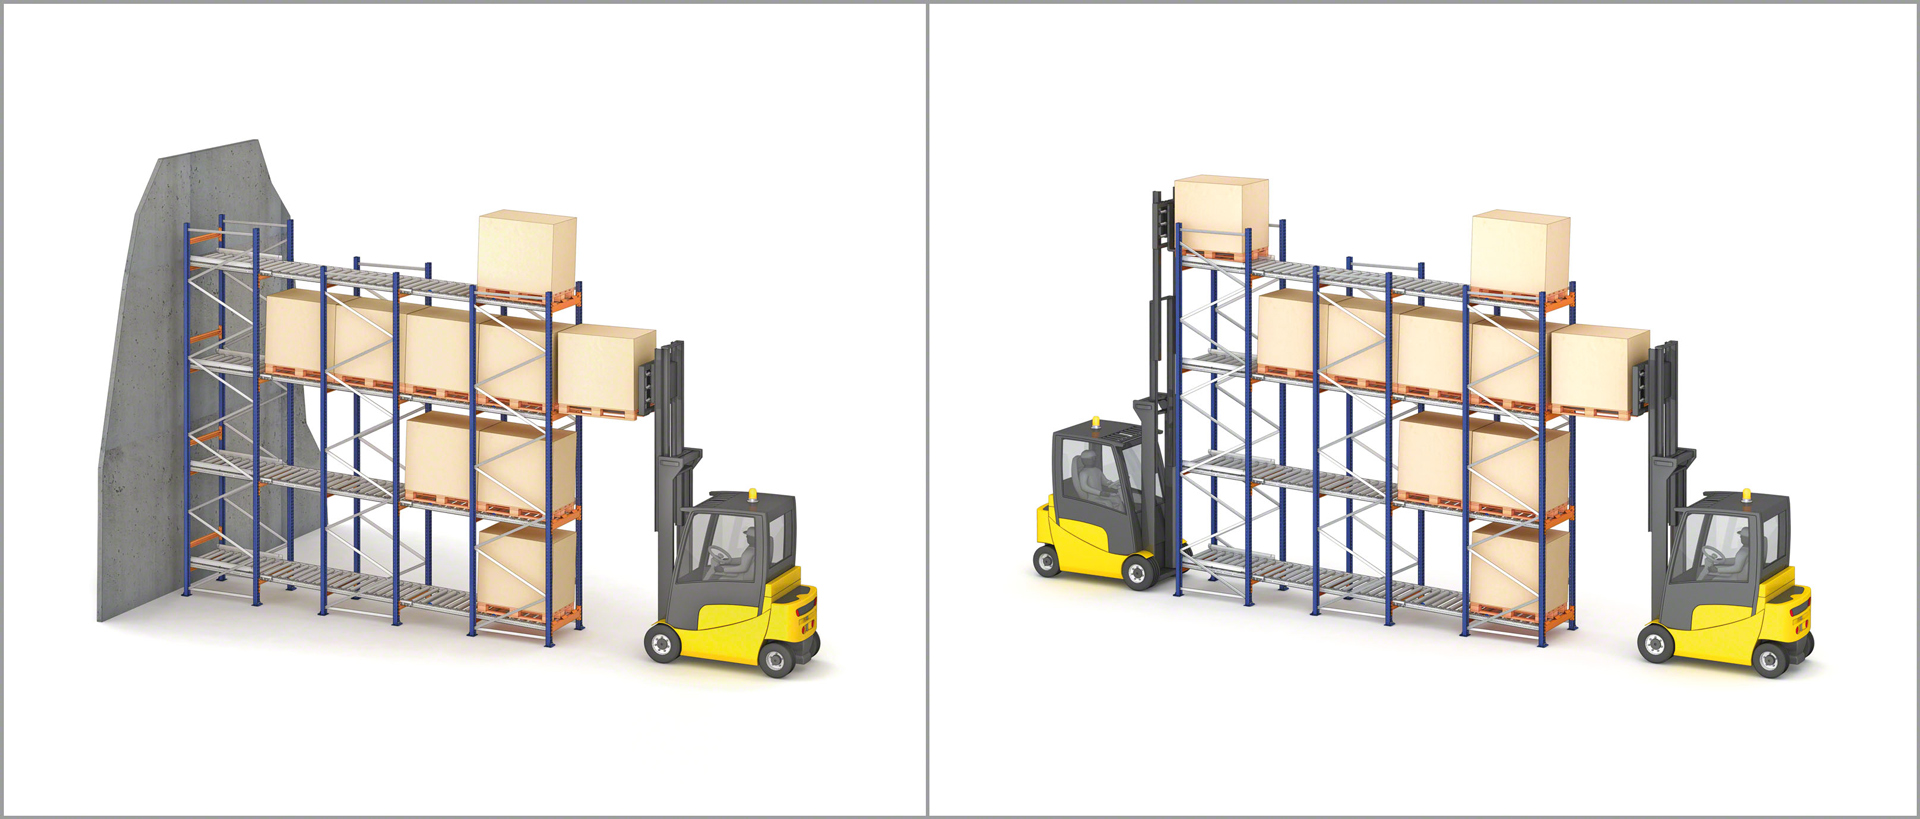 Gravity racking adapts to LIFO and FIFO inventory management methods